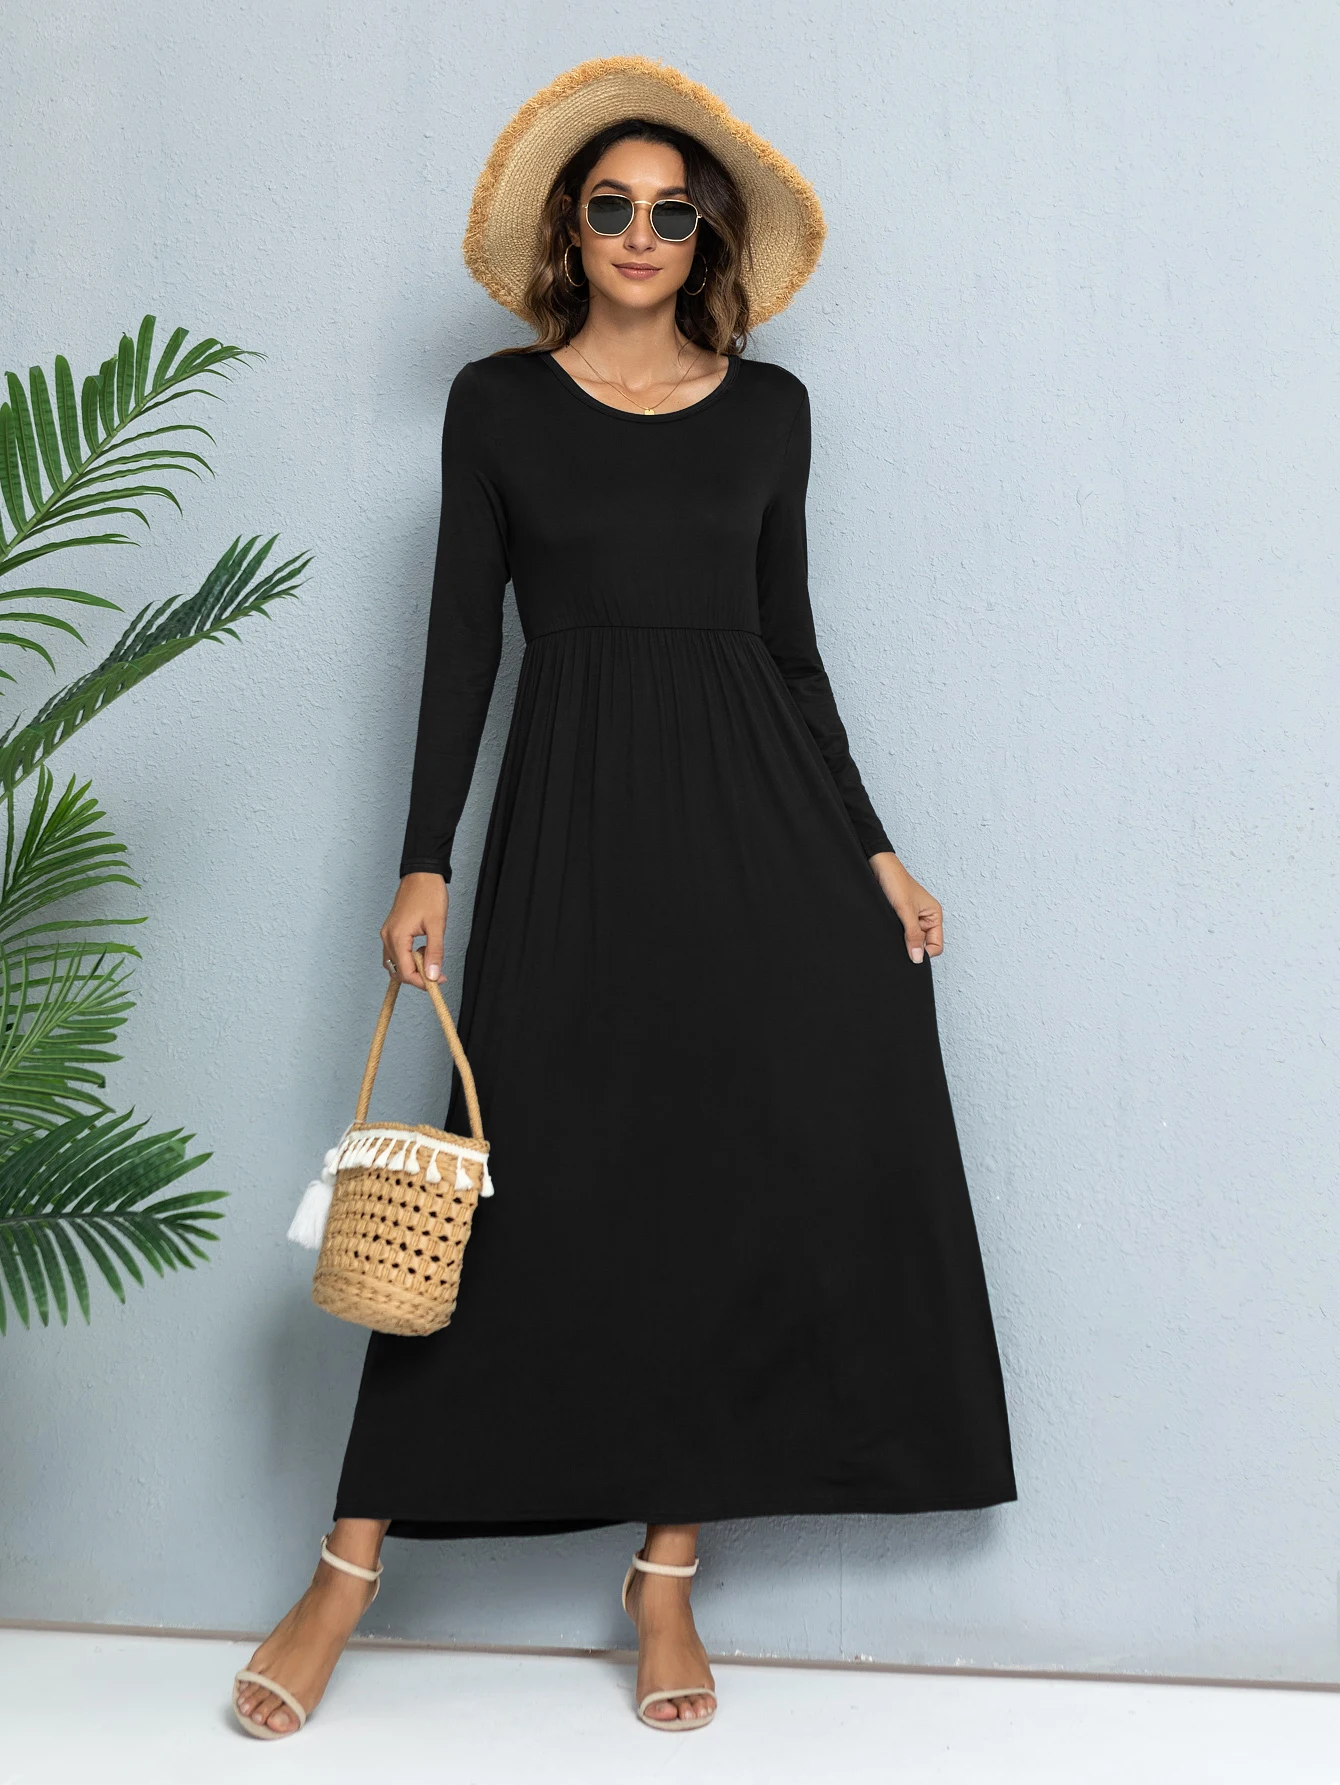 LEVACA Black Tunic Long Sleeve Ruffle Casual Round Neck A Line Maxi Dress Suitable For Spring And Autumn